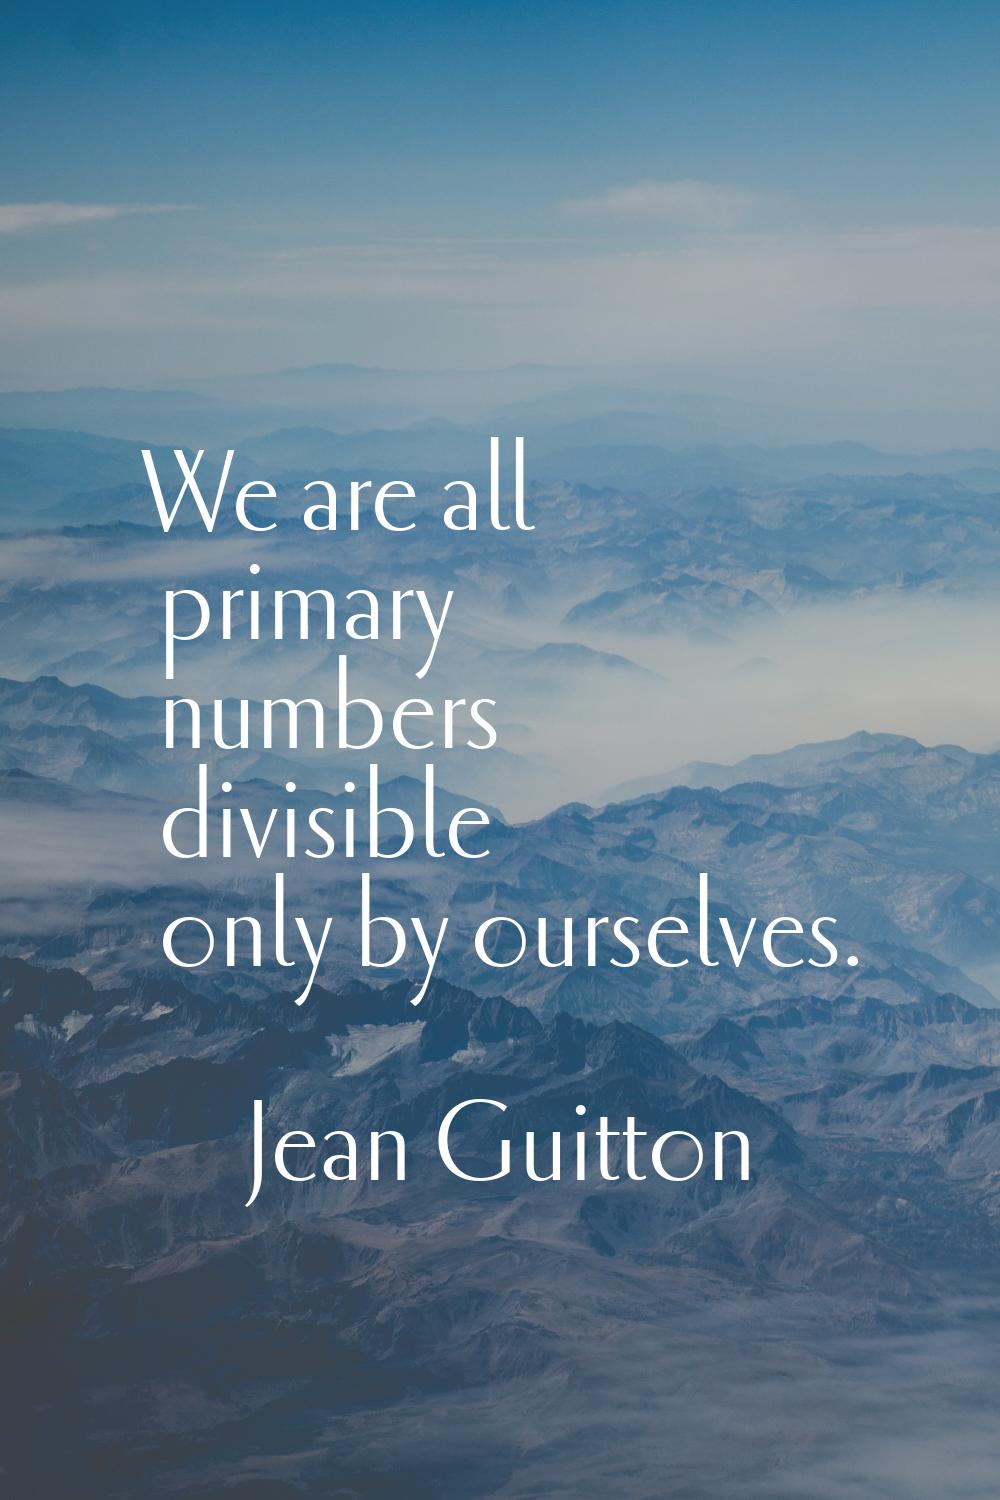 We are all primary numbers divisible only by ourselves.